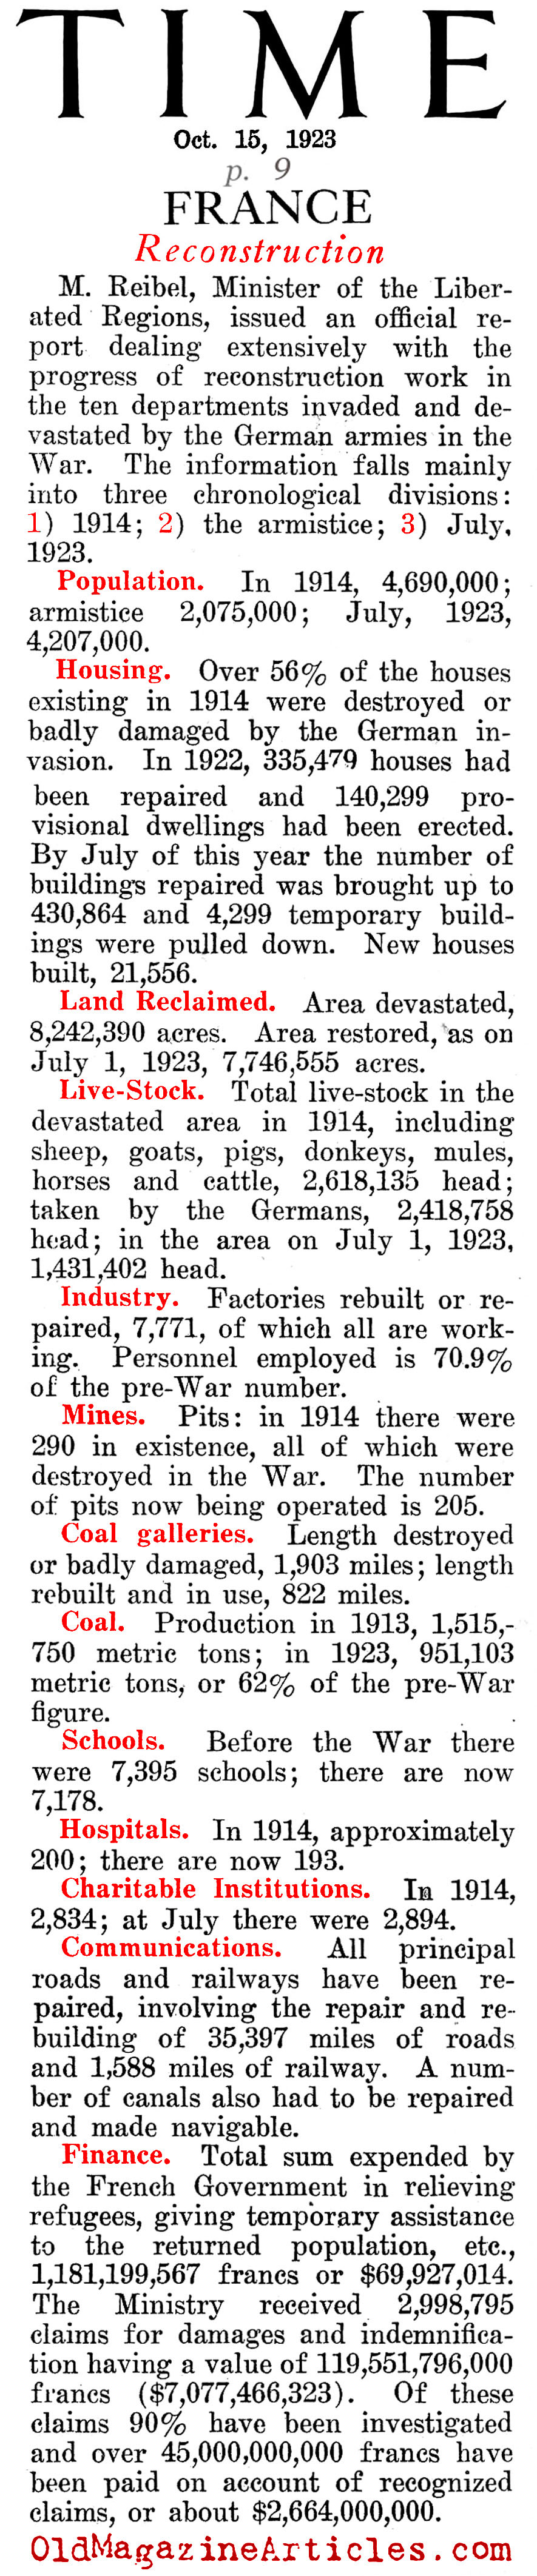 The Damage to The Occupied Areas of France, (Time Magazine, 1923)